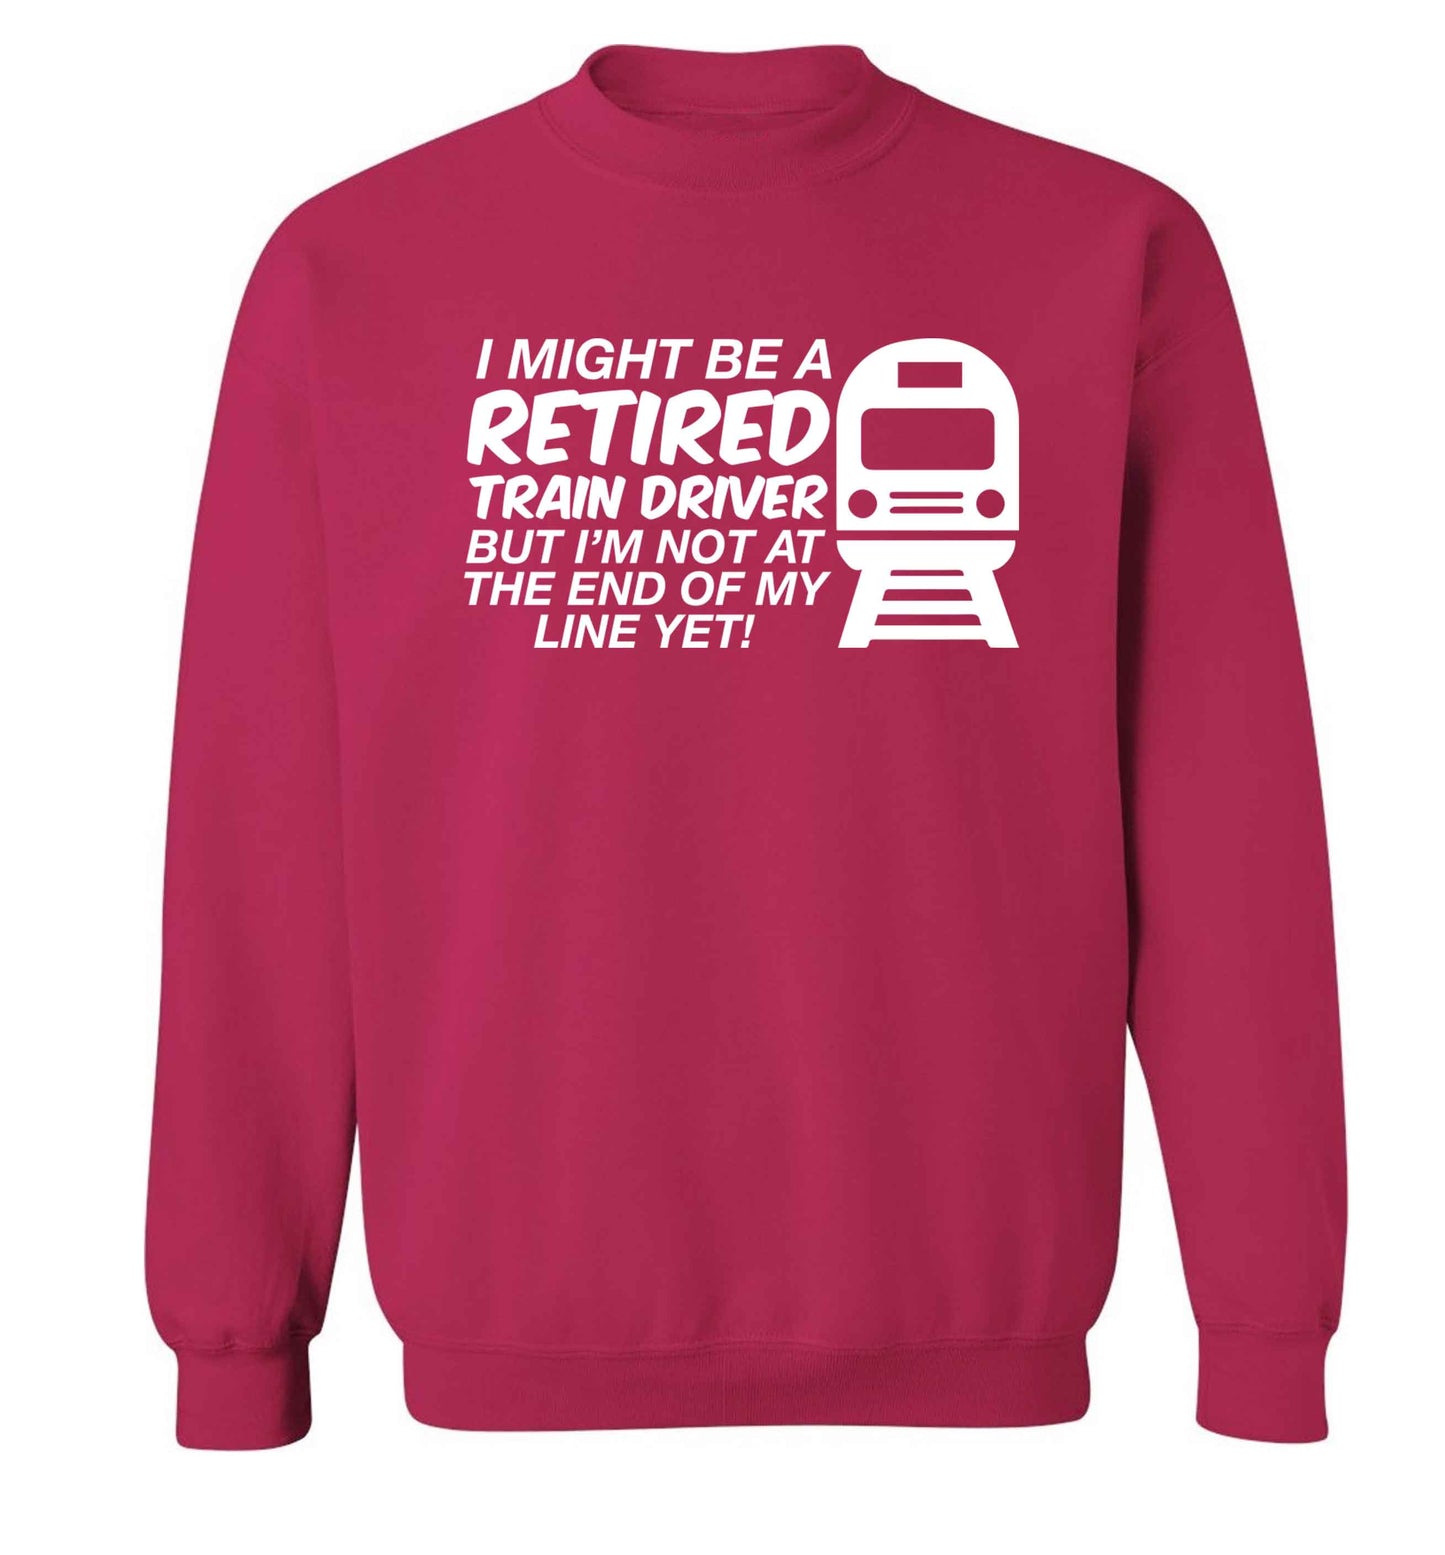 Retired train driver but I'm not at the end of my line yet Adult's unisex pink Sweater 2XL